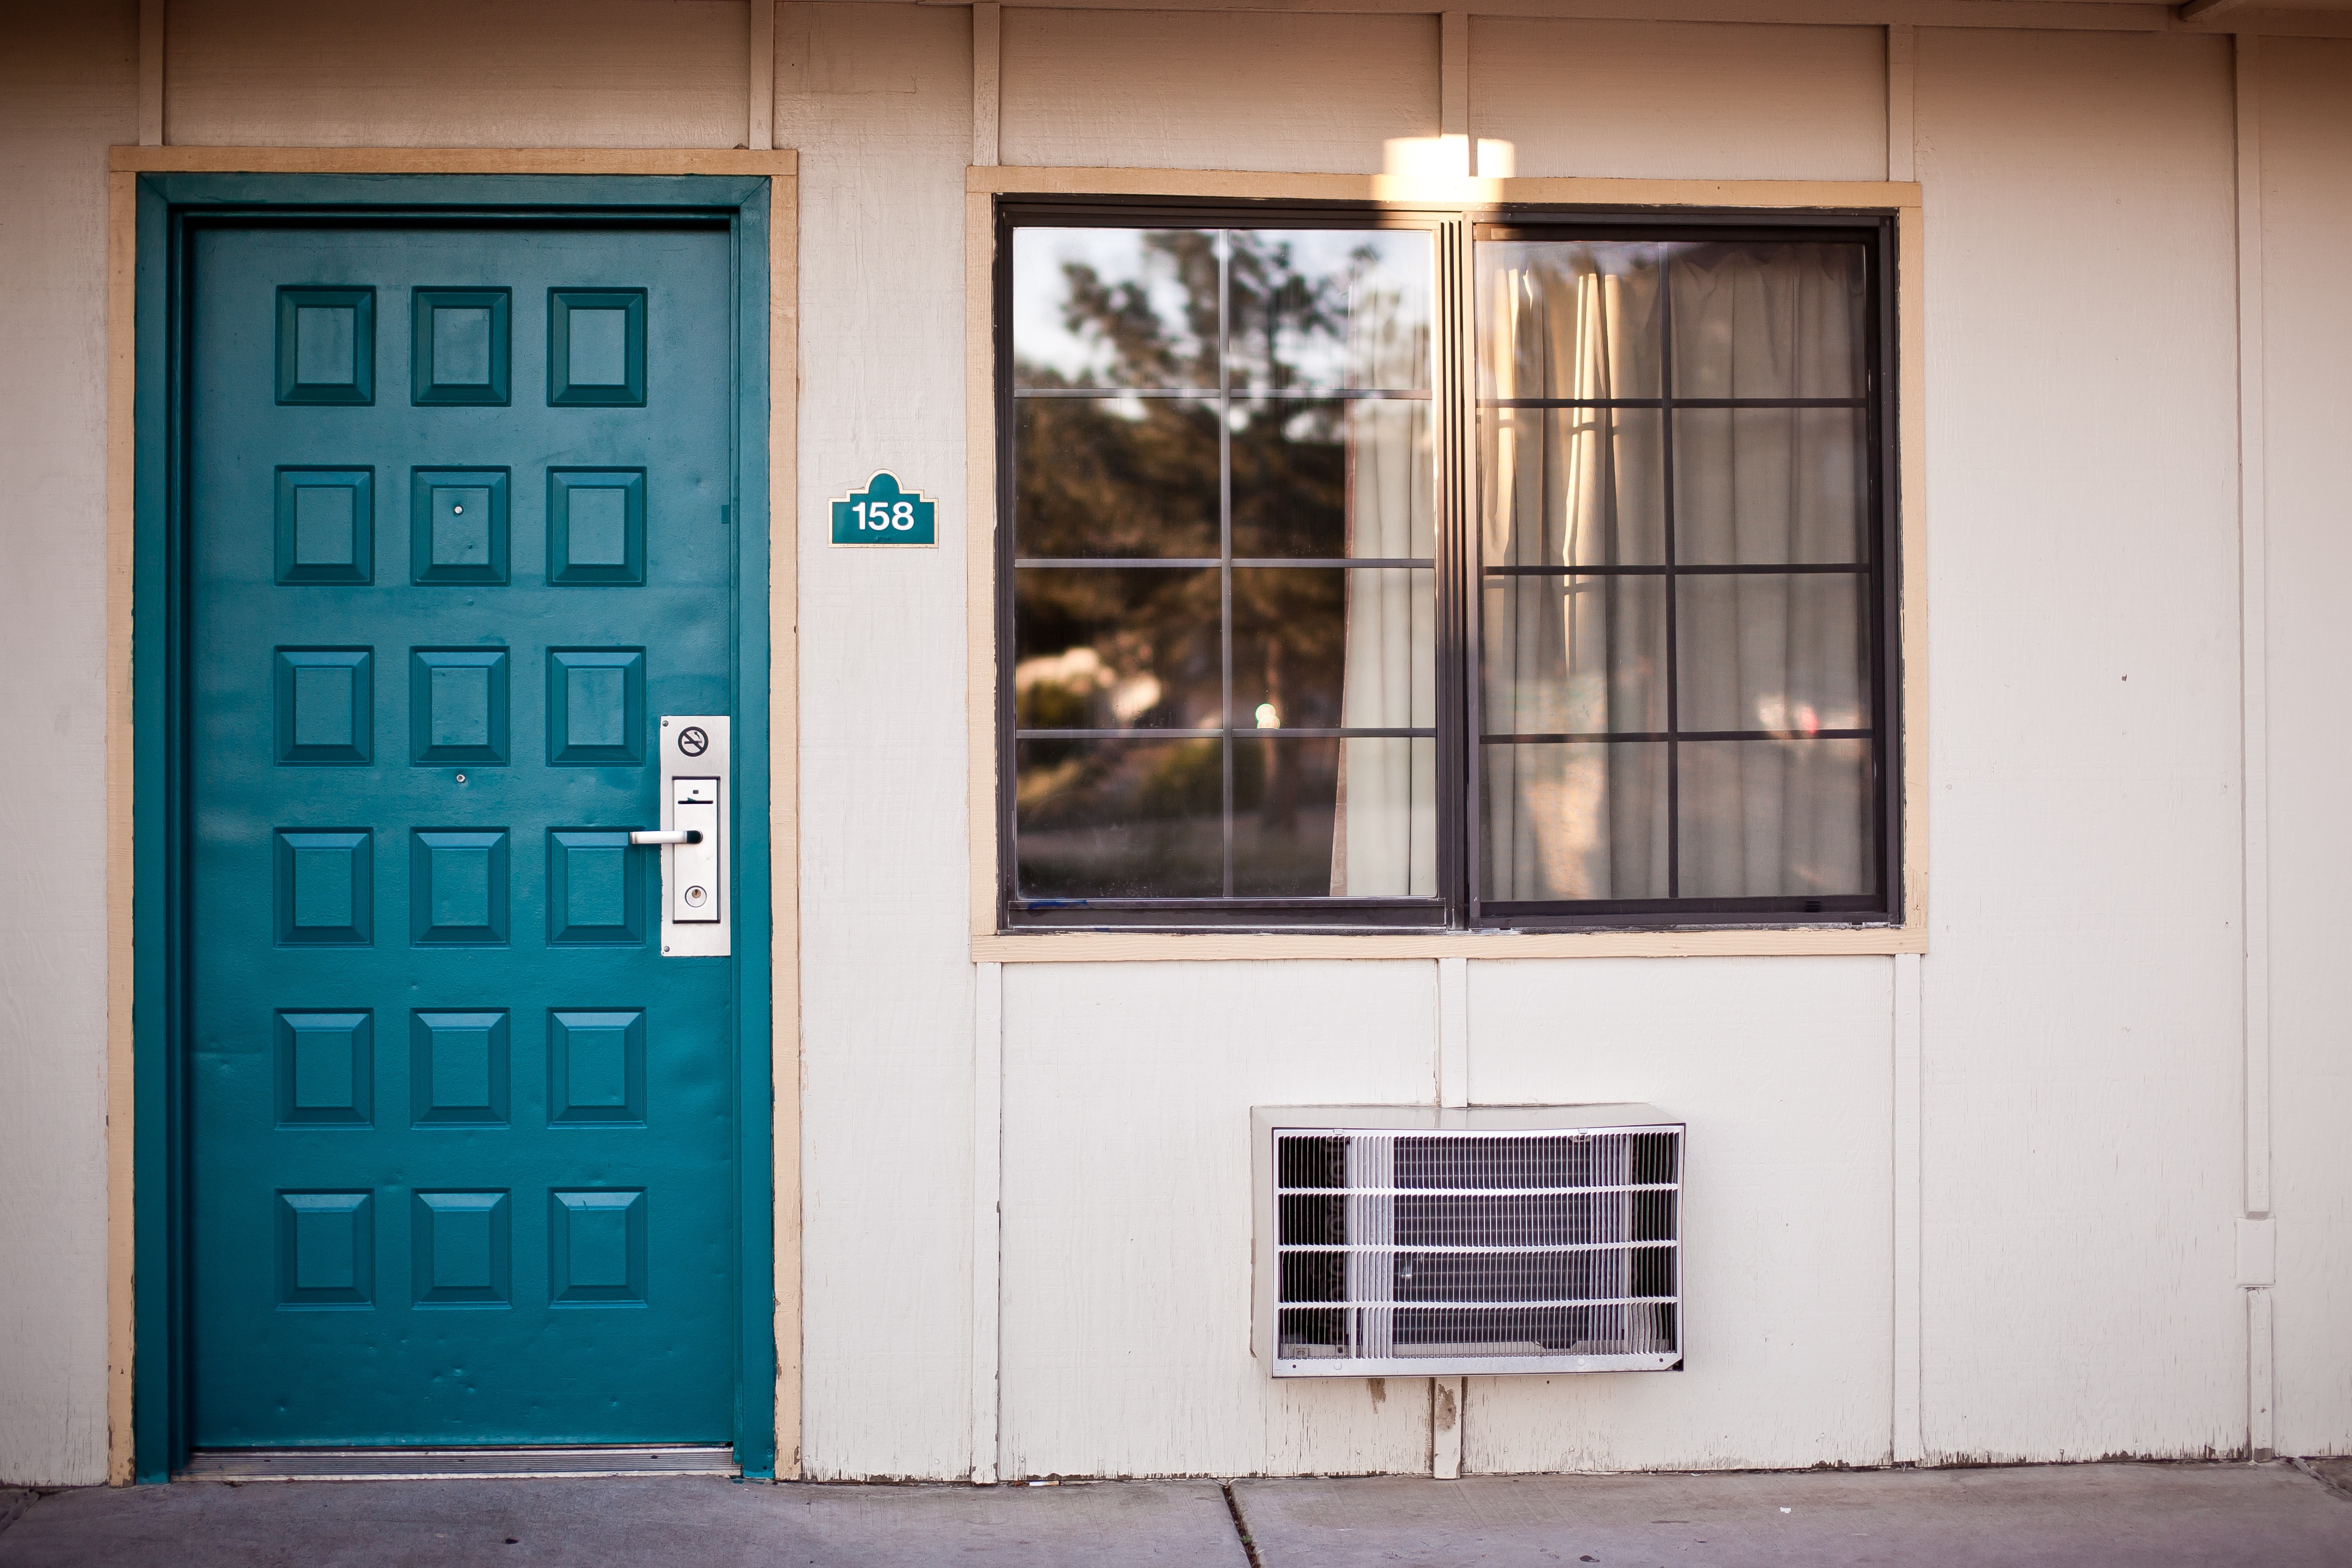 The facade of a motel room | Source: Pexels